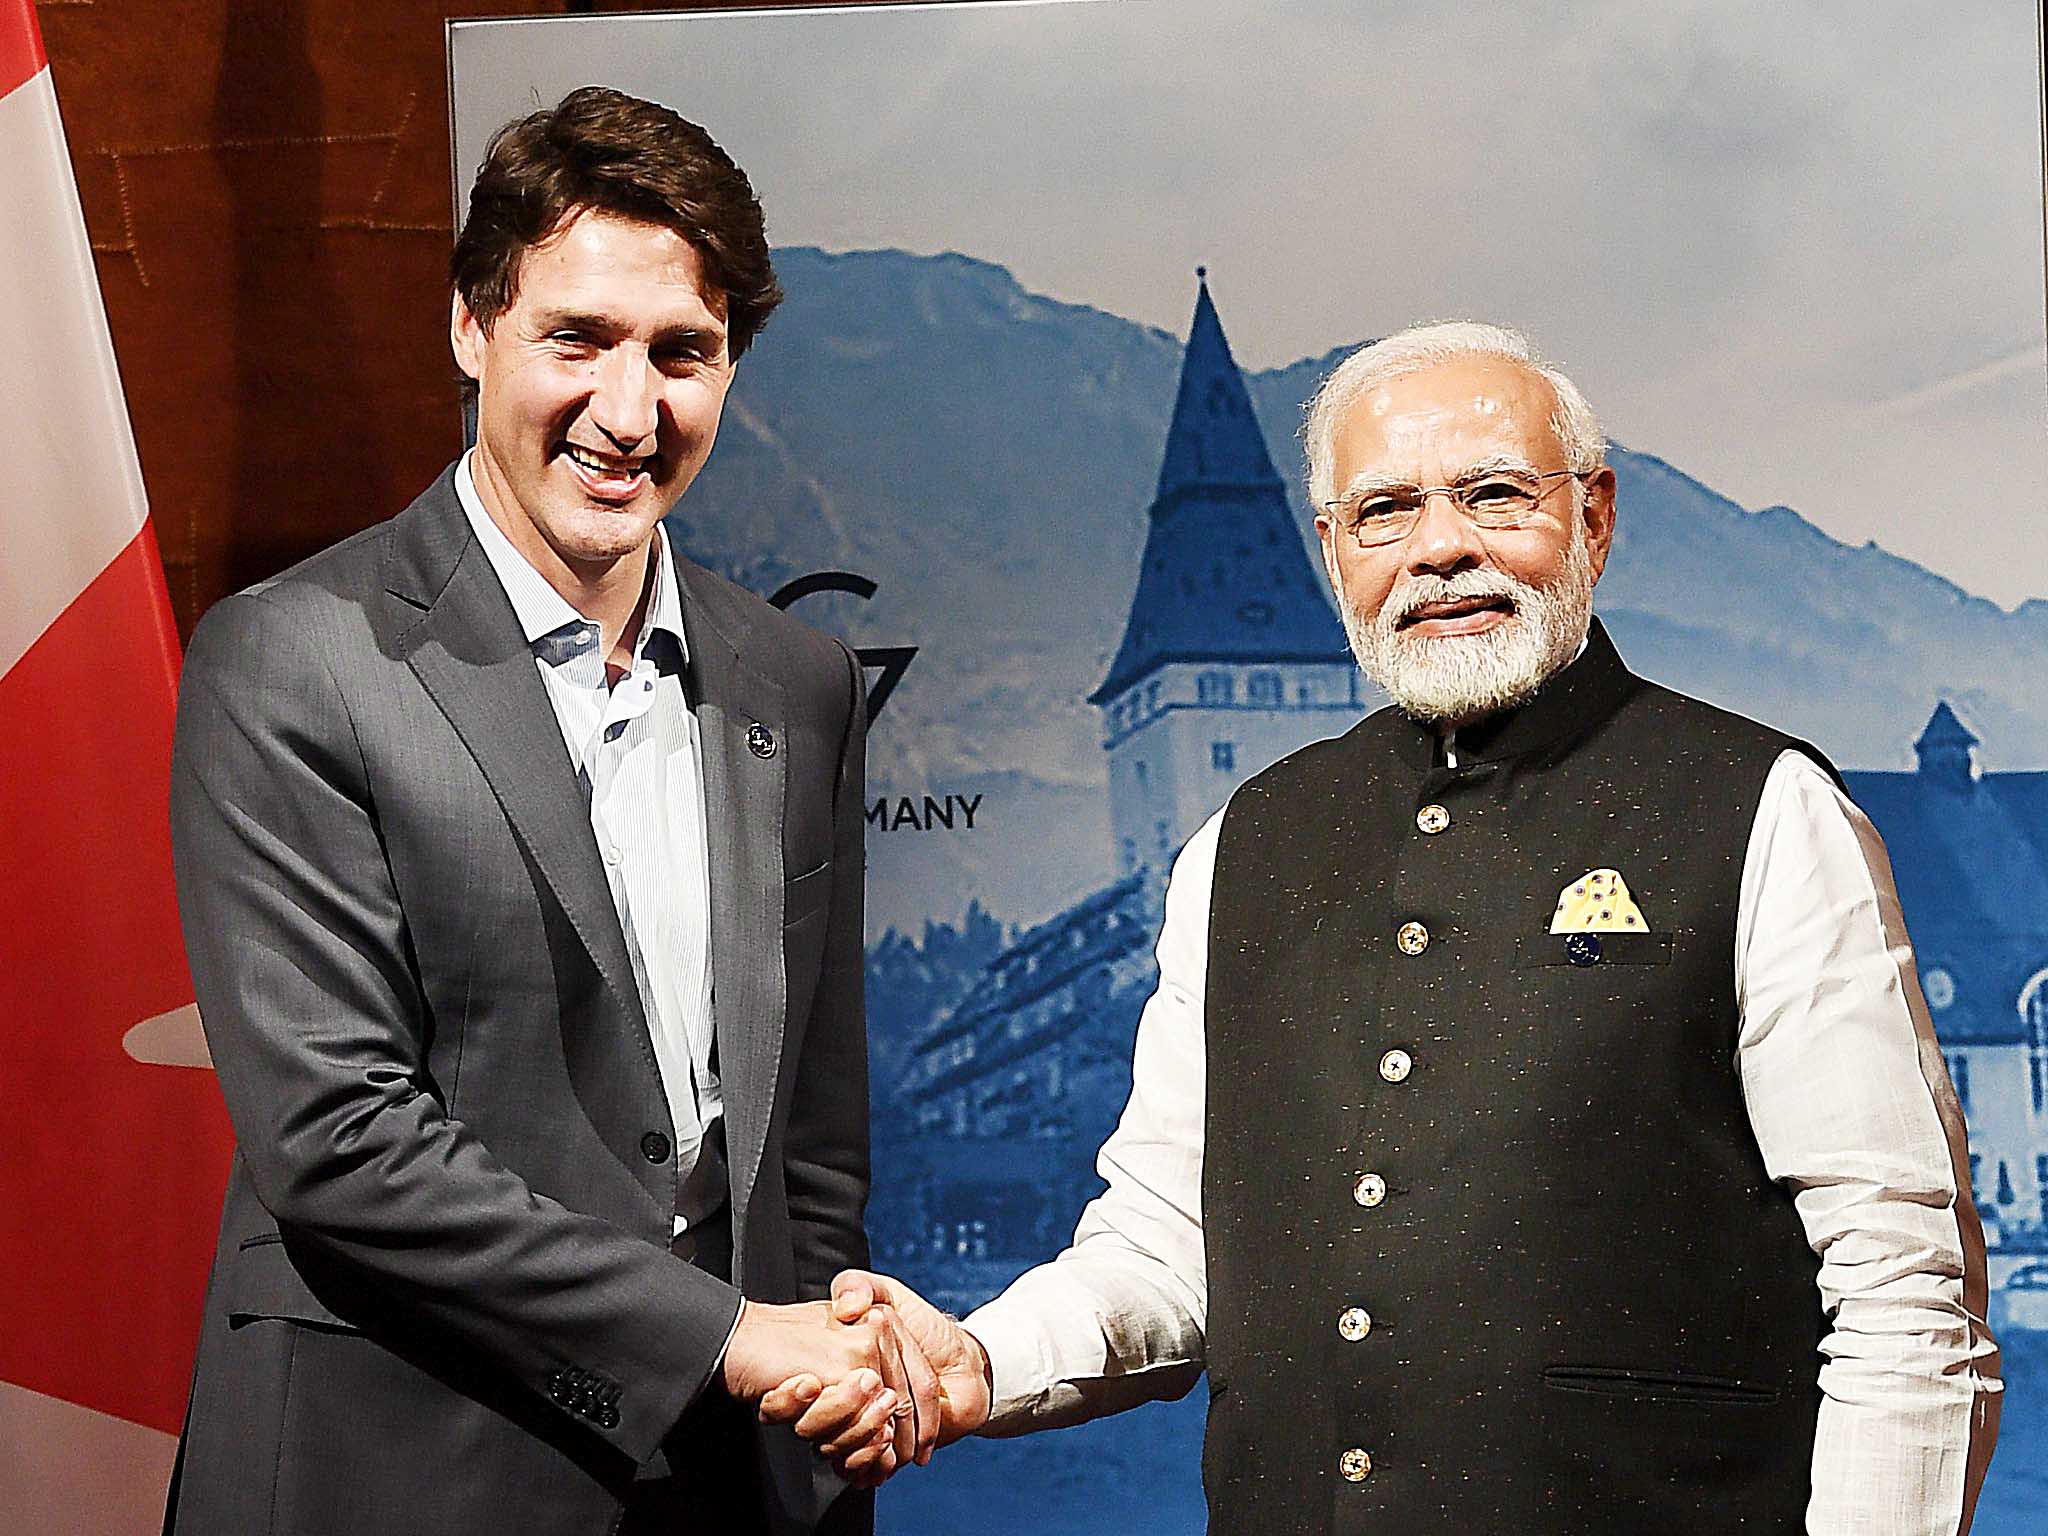 Prime Ministers @narendramodi and @JustinTrudeau meet on the sidelines of the G-7 Summit in Germany. They took stock of the India-Canada friendship and discussed ways to further strengthen it across various sectors.